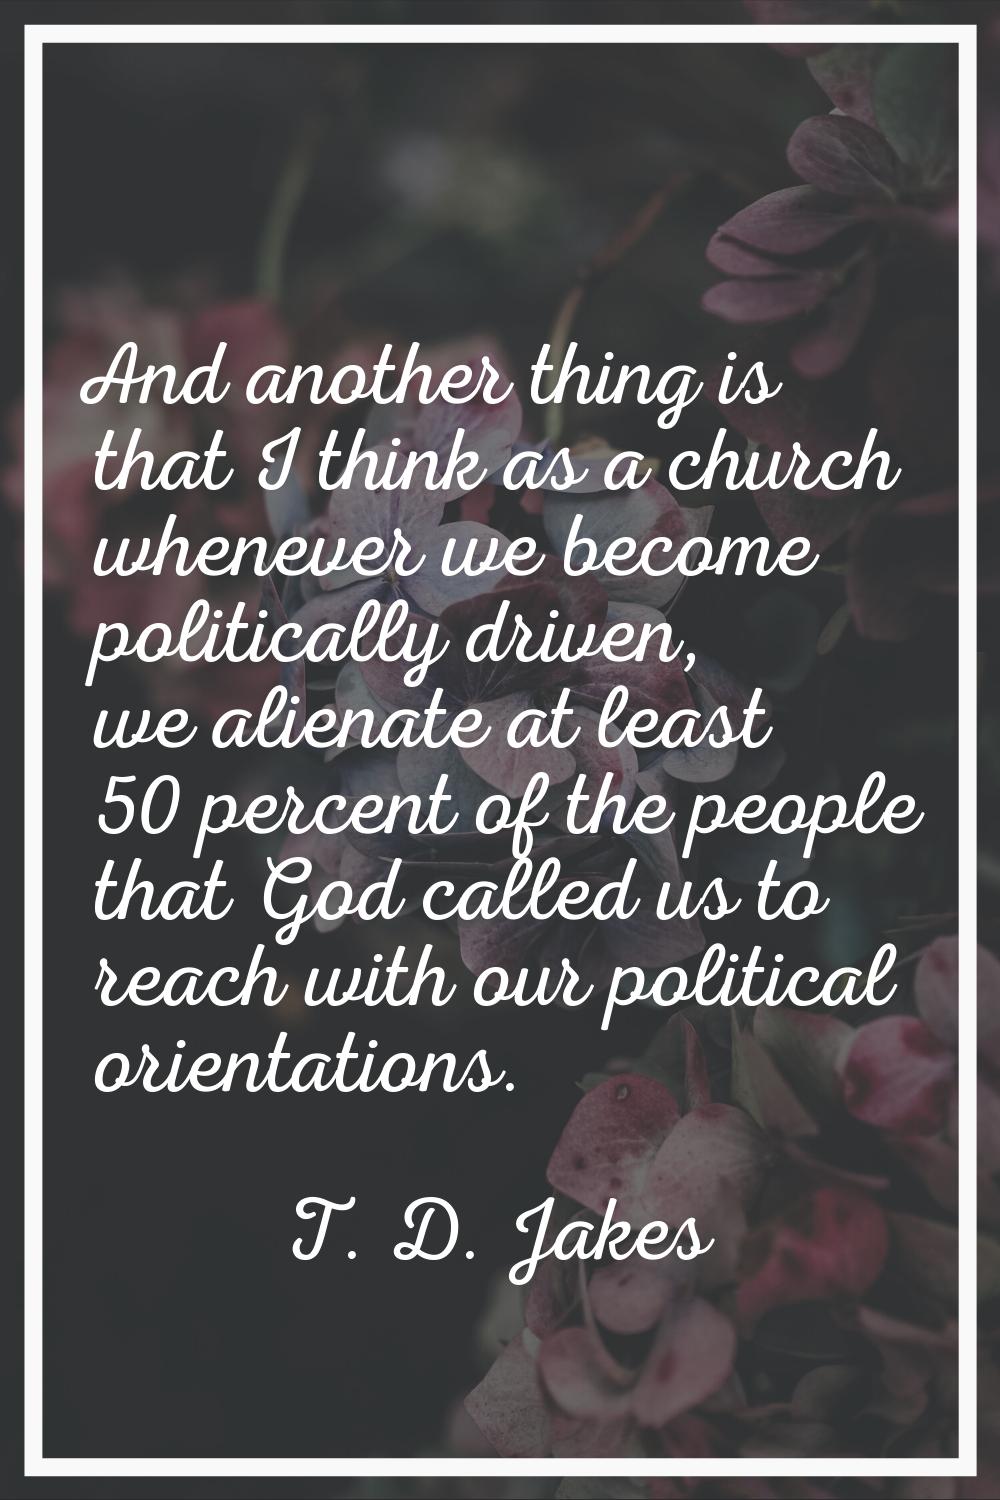 And another thing is that I think as a church whenever we become politically driven, we alienate at